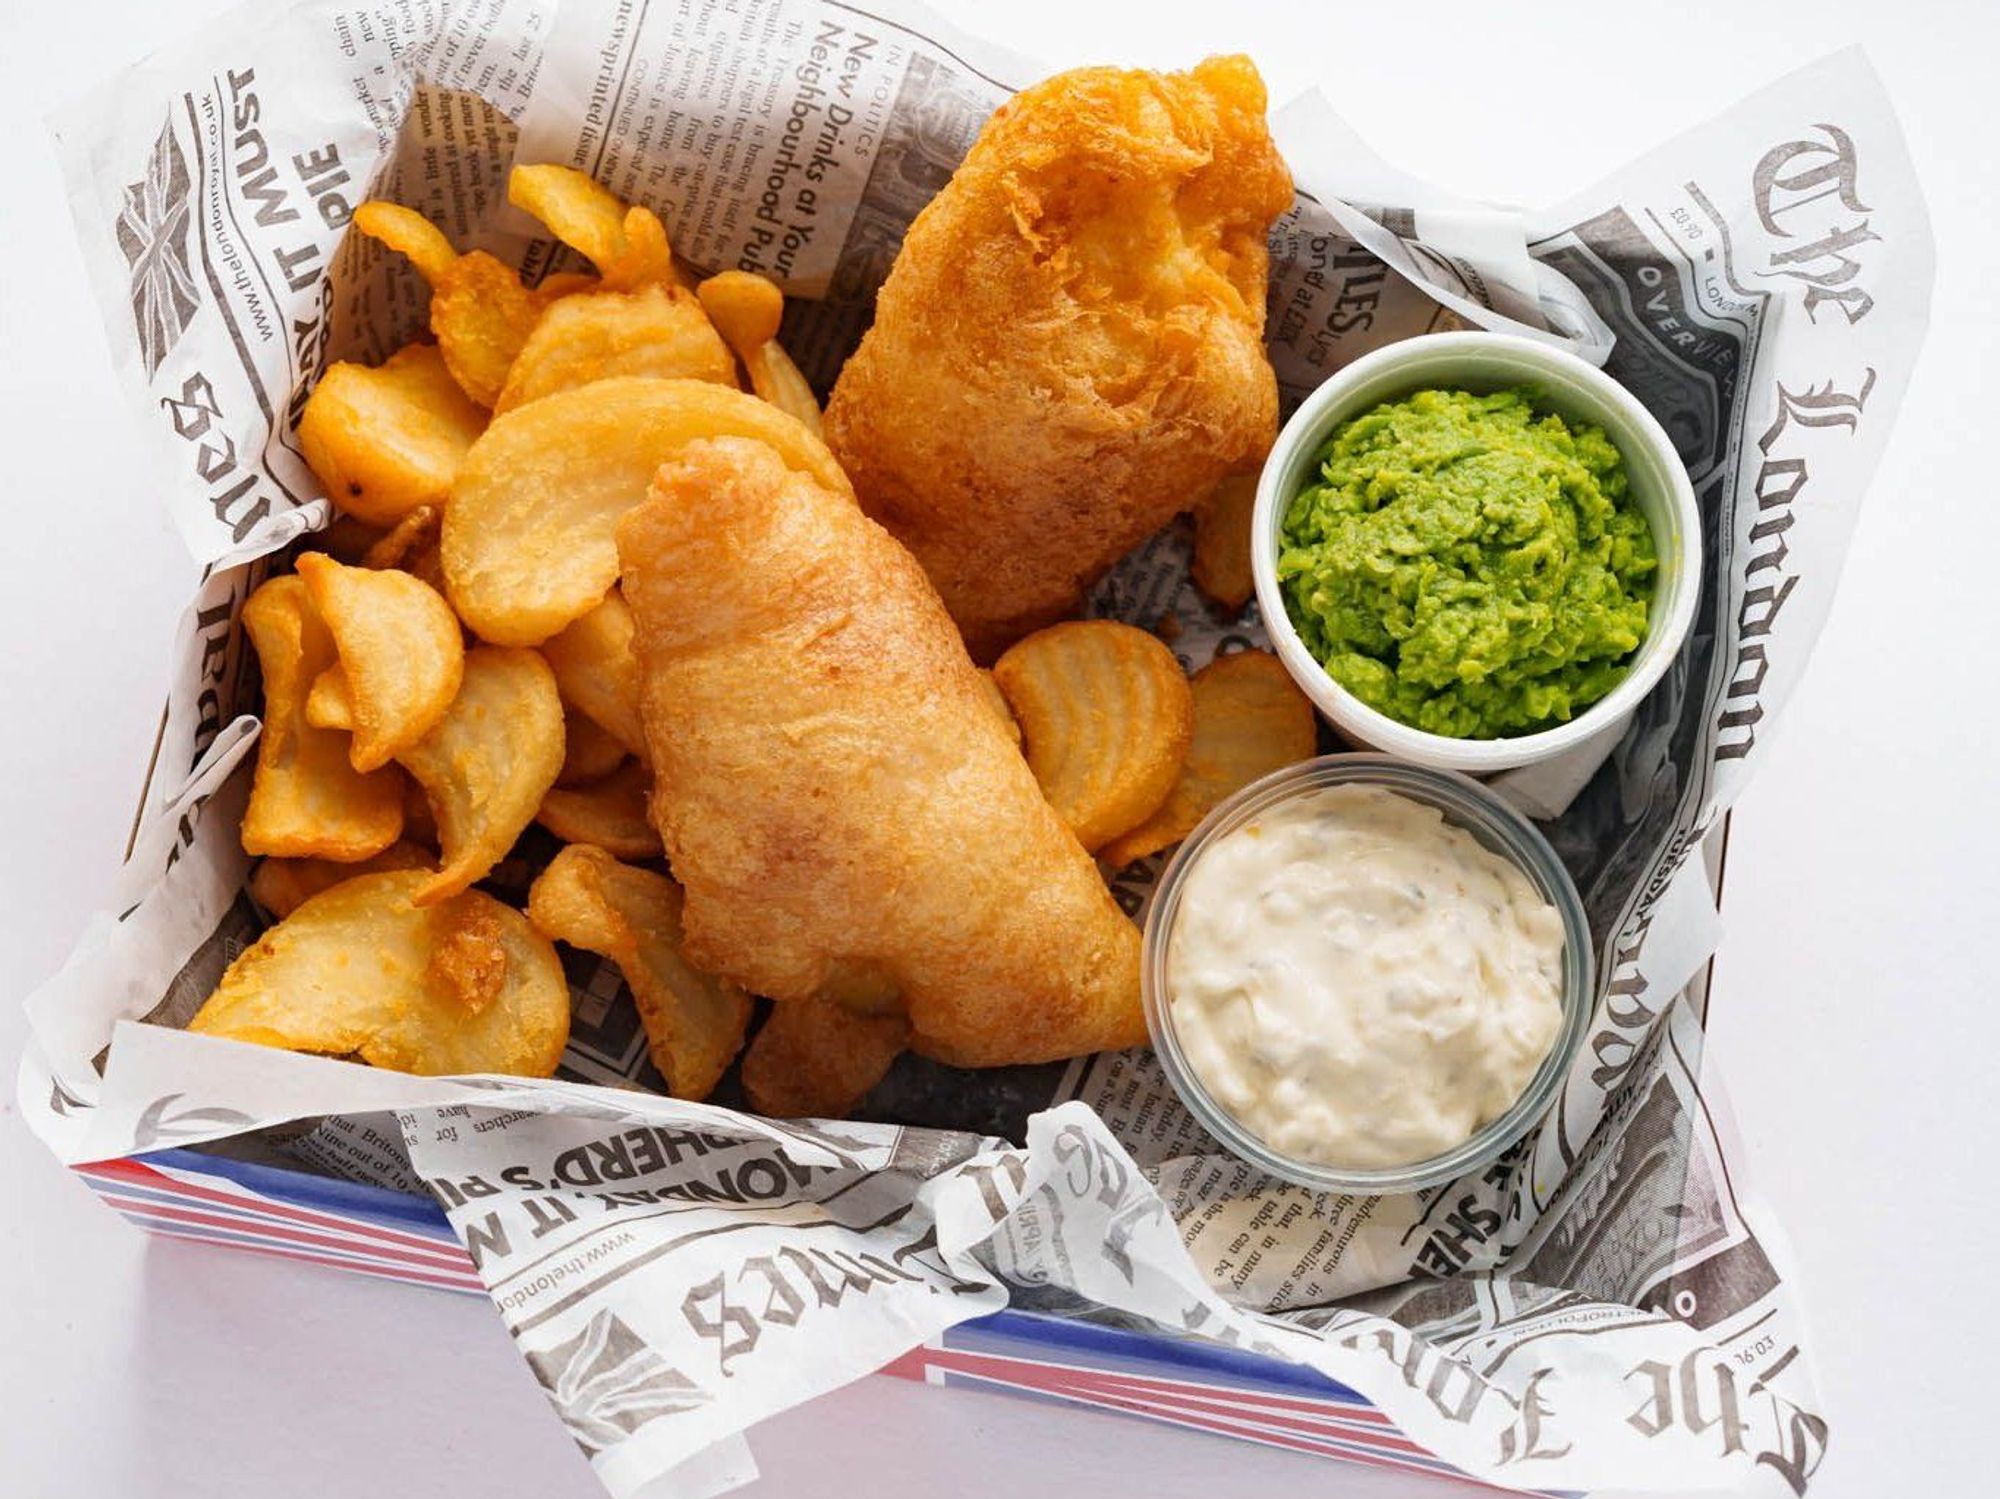 Traditional Fish & Chips Recipe - Great British Chefs